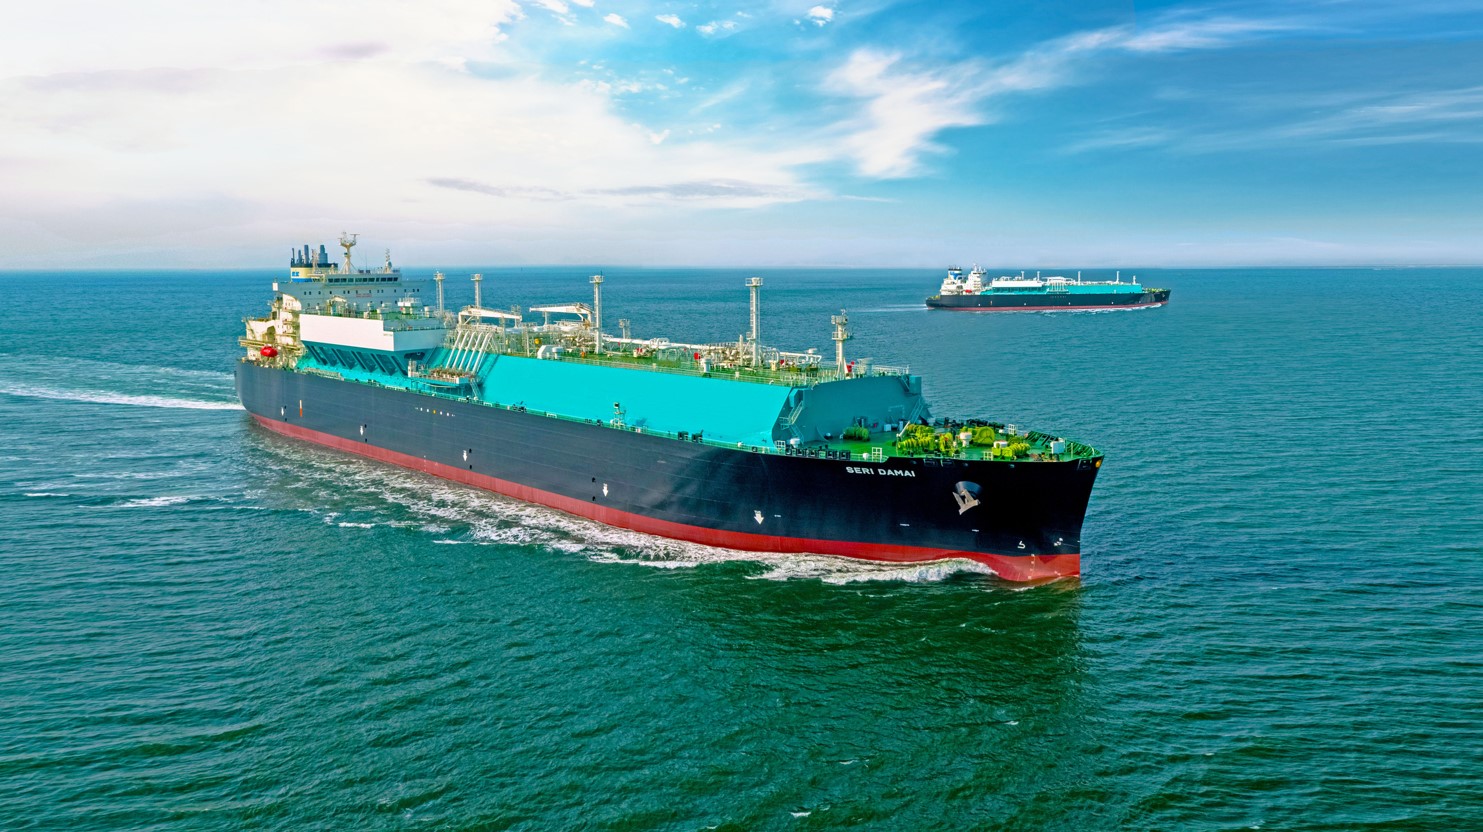 MISC's LNG earnings slightly down in Q1